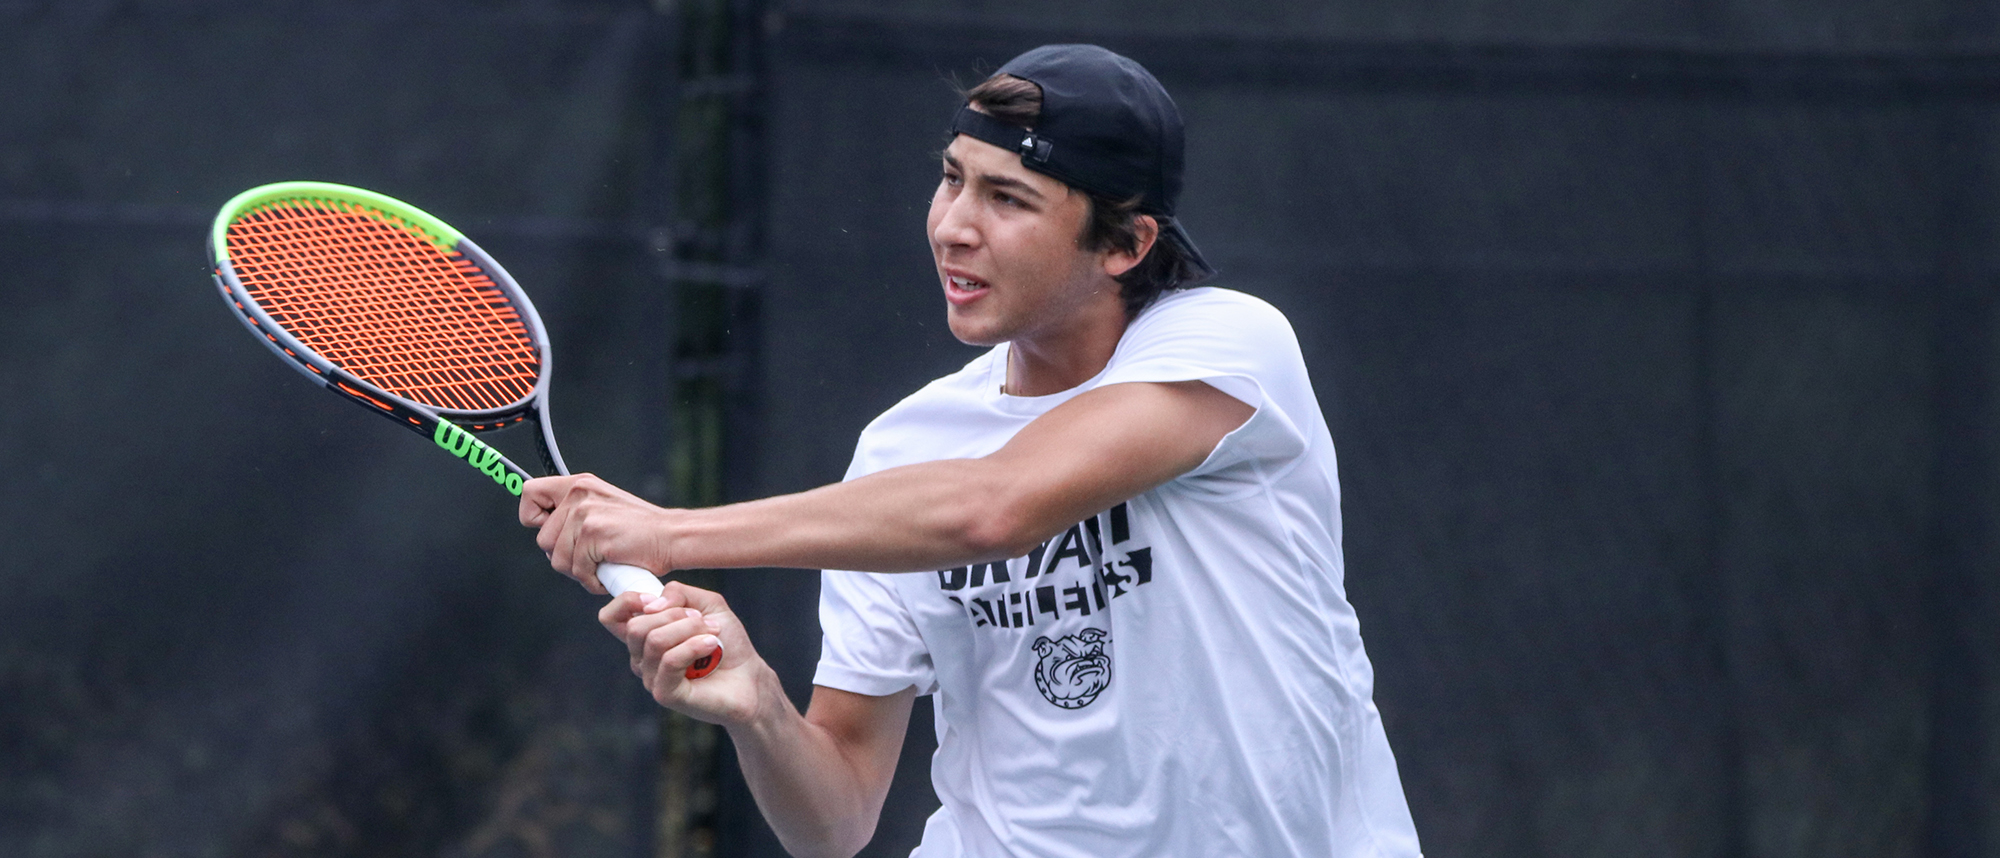 Bulldogs compete in ITA Regionals at UPenn